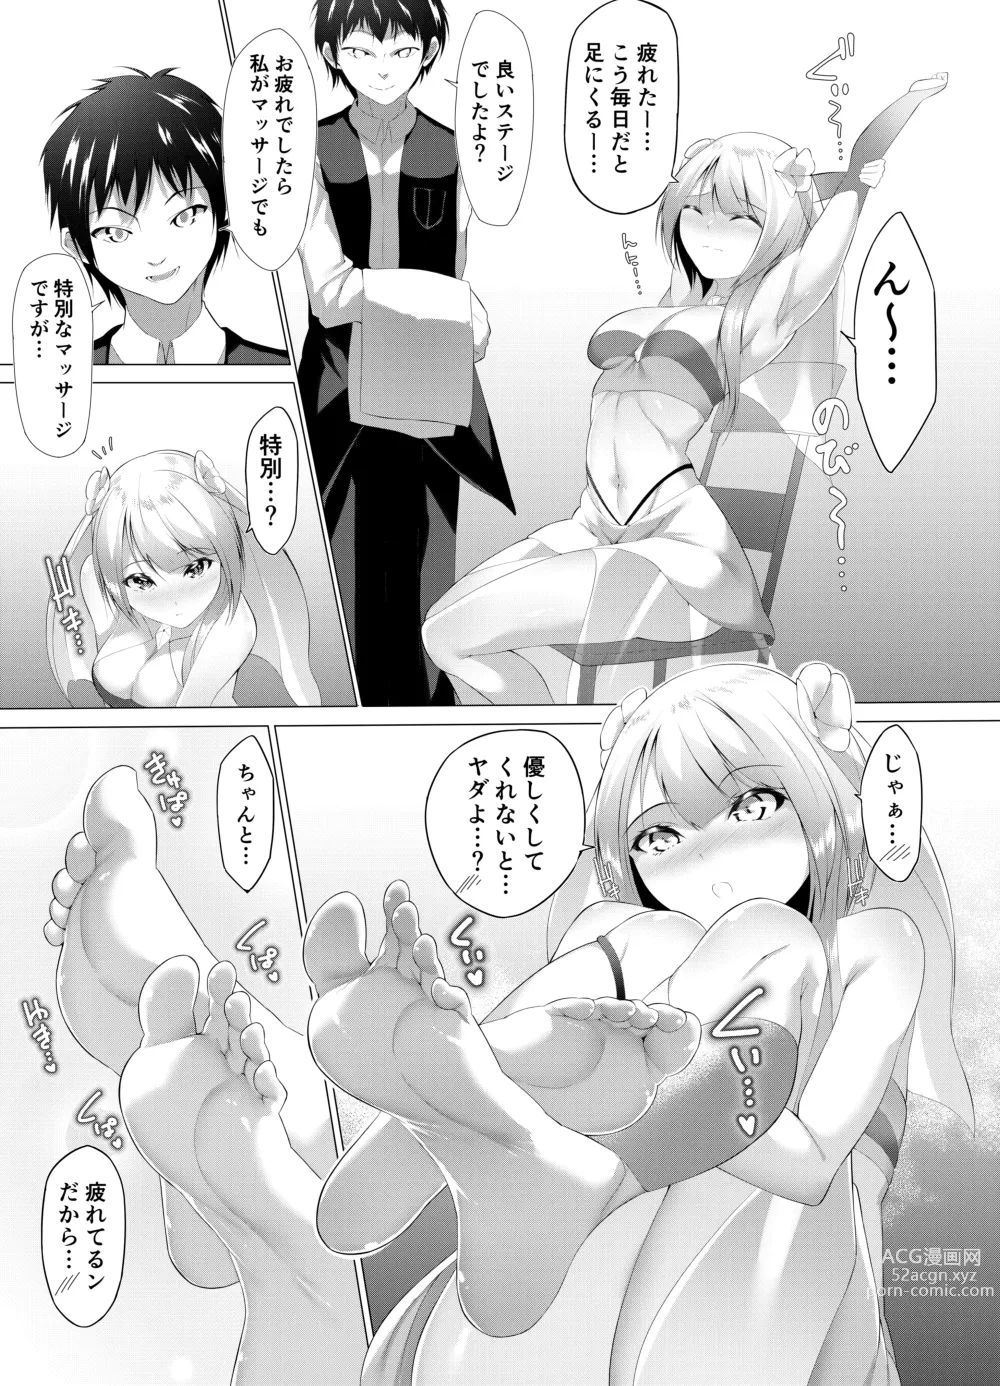 Page 2 of doujinshi 踊り子の秘密